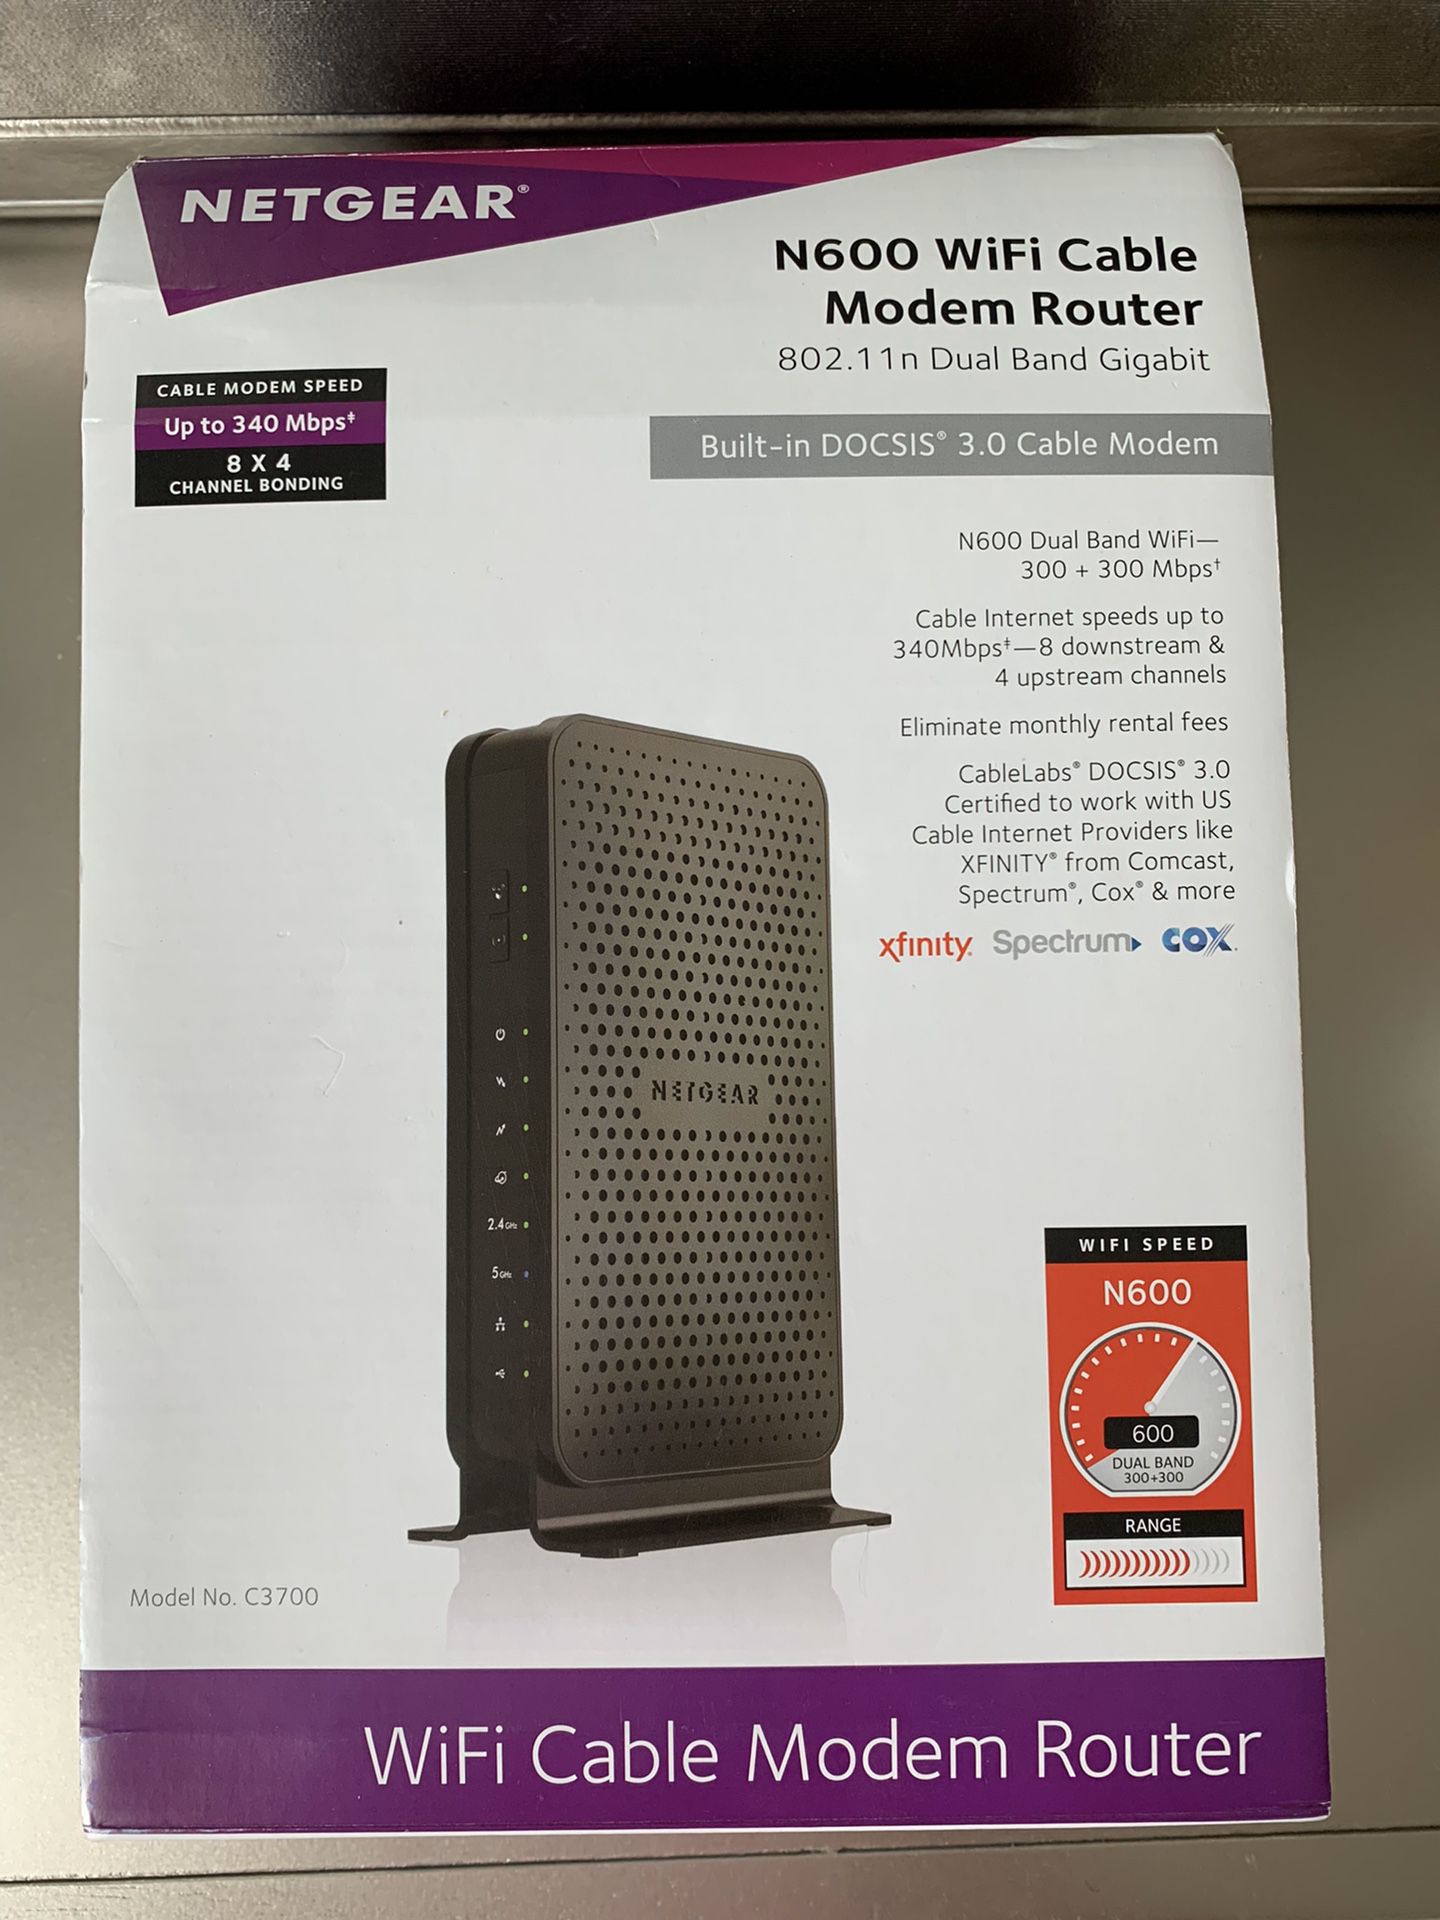 WIFE Cable Modem Router